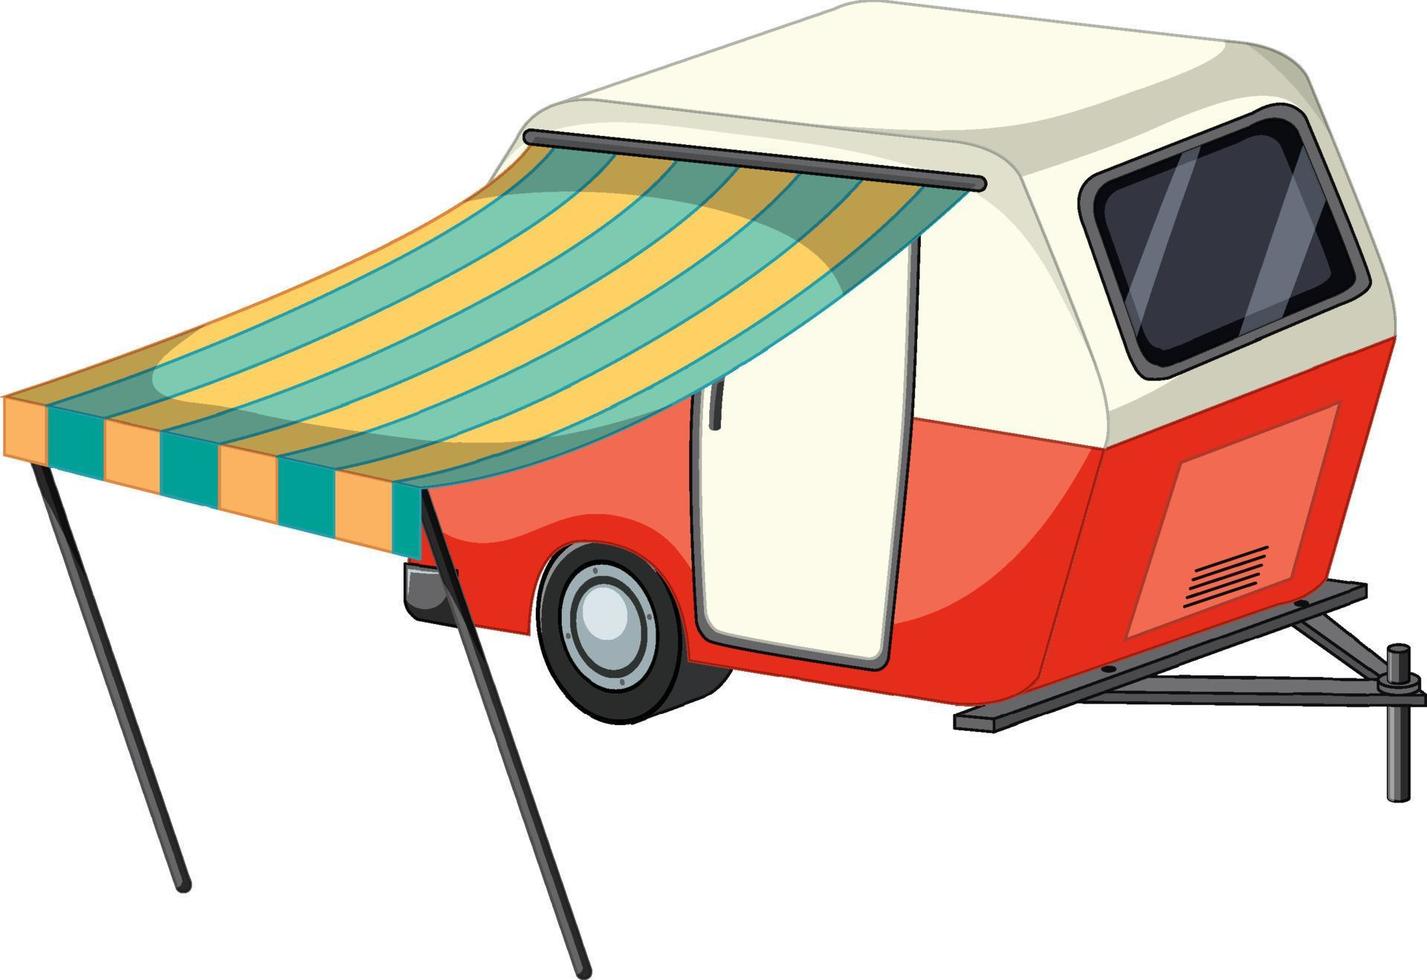 Caravan for camping on white background vector